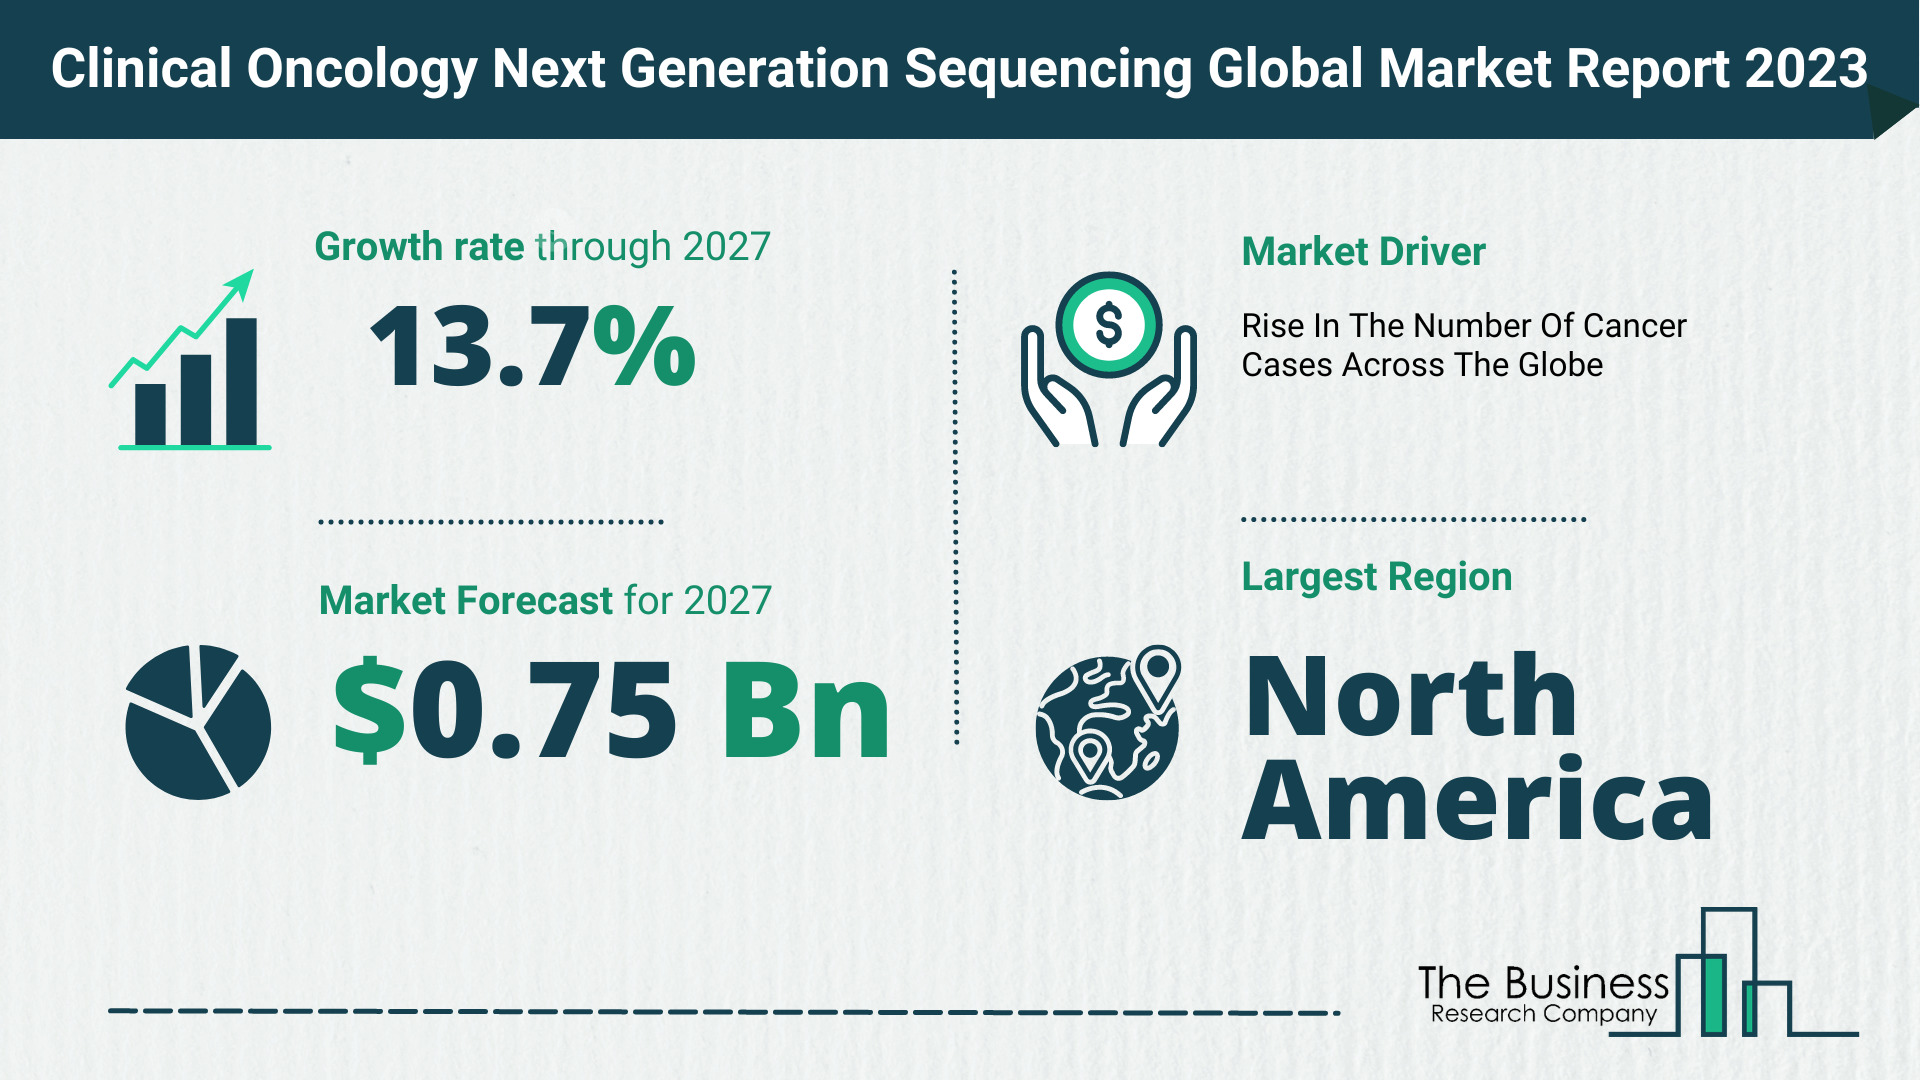 Global Clinical Oncology Next Generation Sequencing Market Opportunities And Strategies 2023